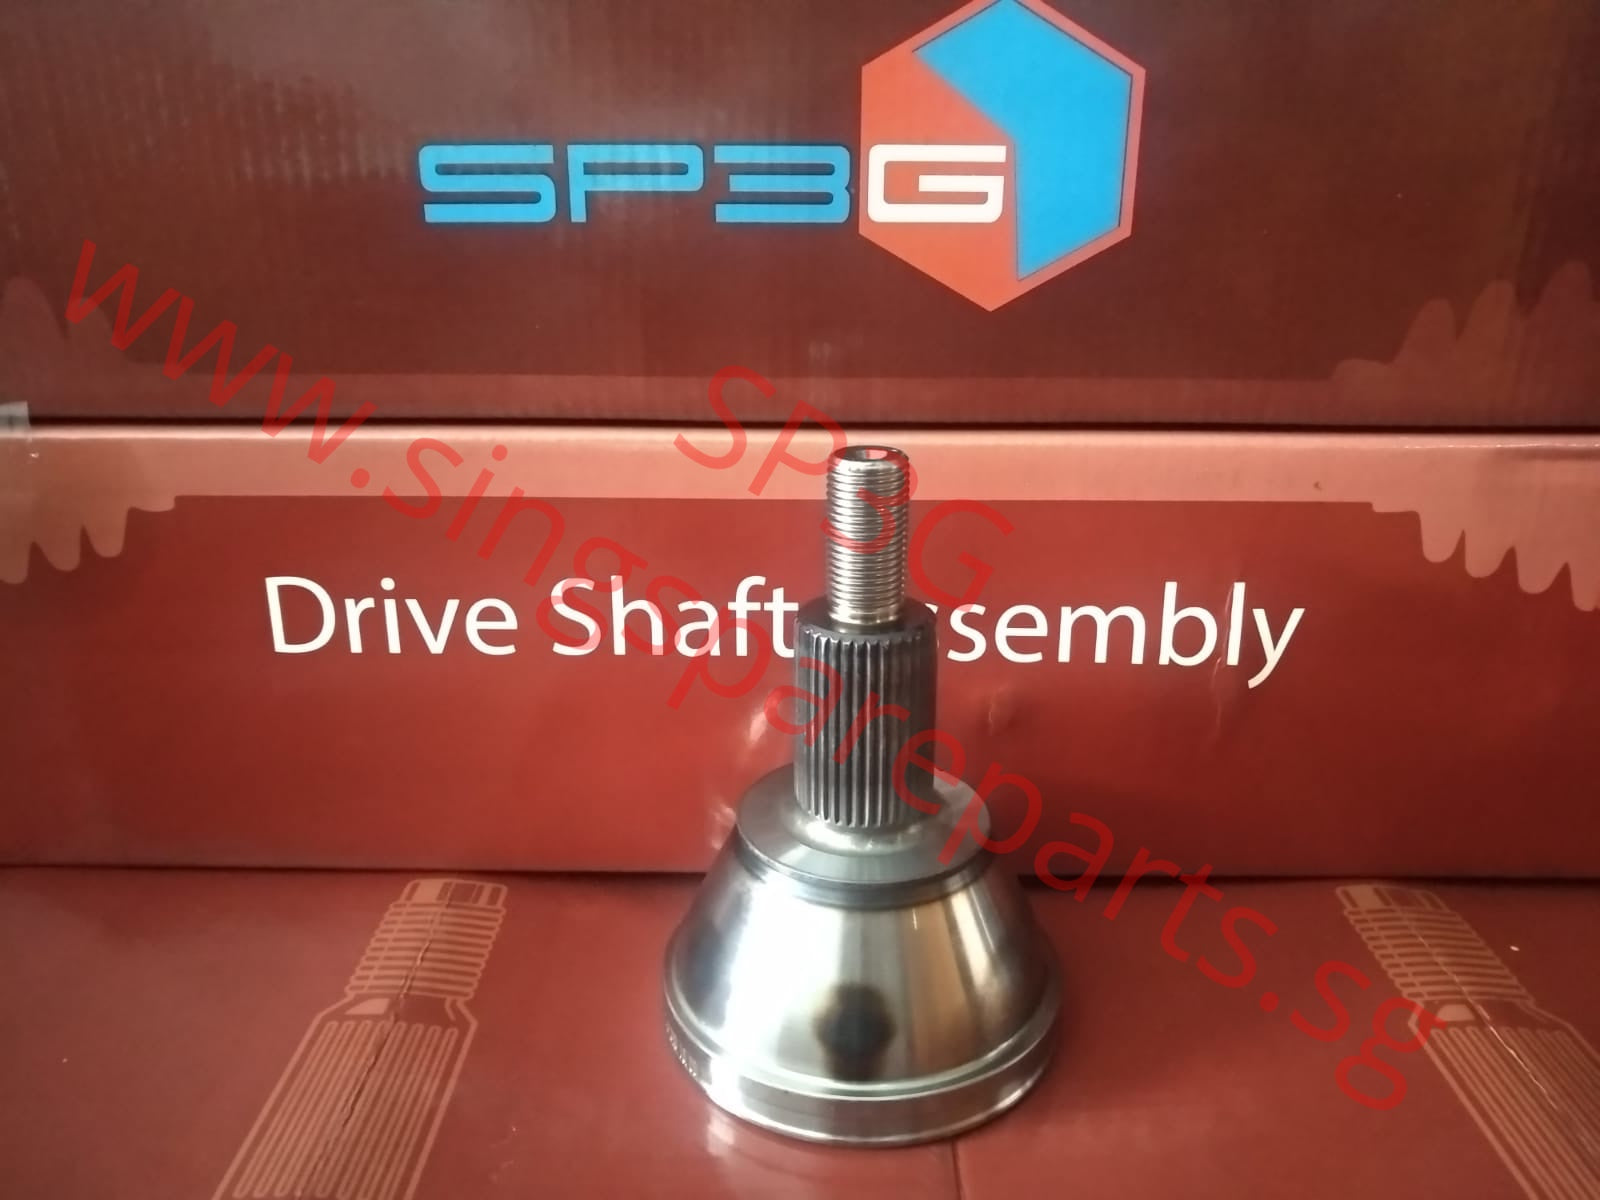 Volkswagen Polo  CV Joint (Constant Velocity Joint) A=36 F=30 O=52